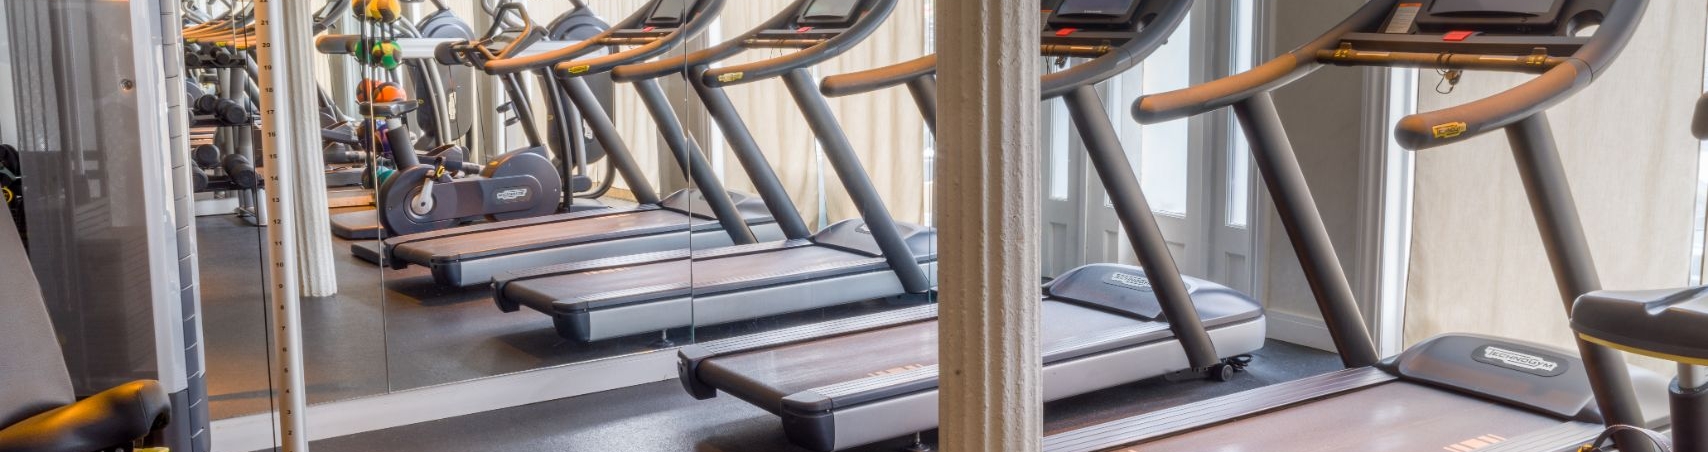 gym with treadmills and lifting equipment